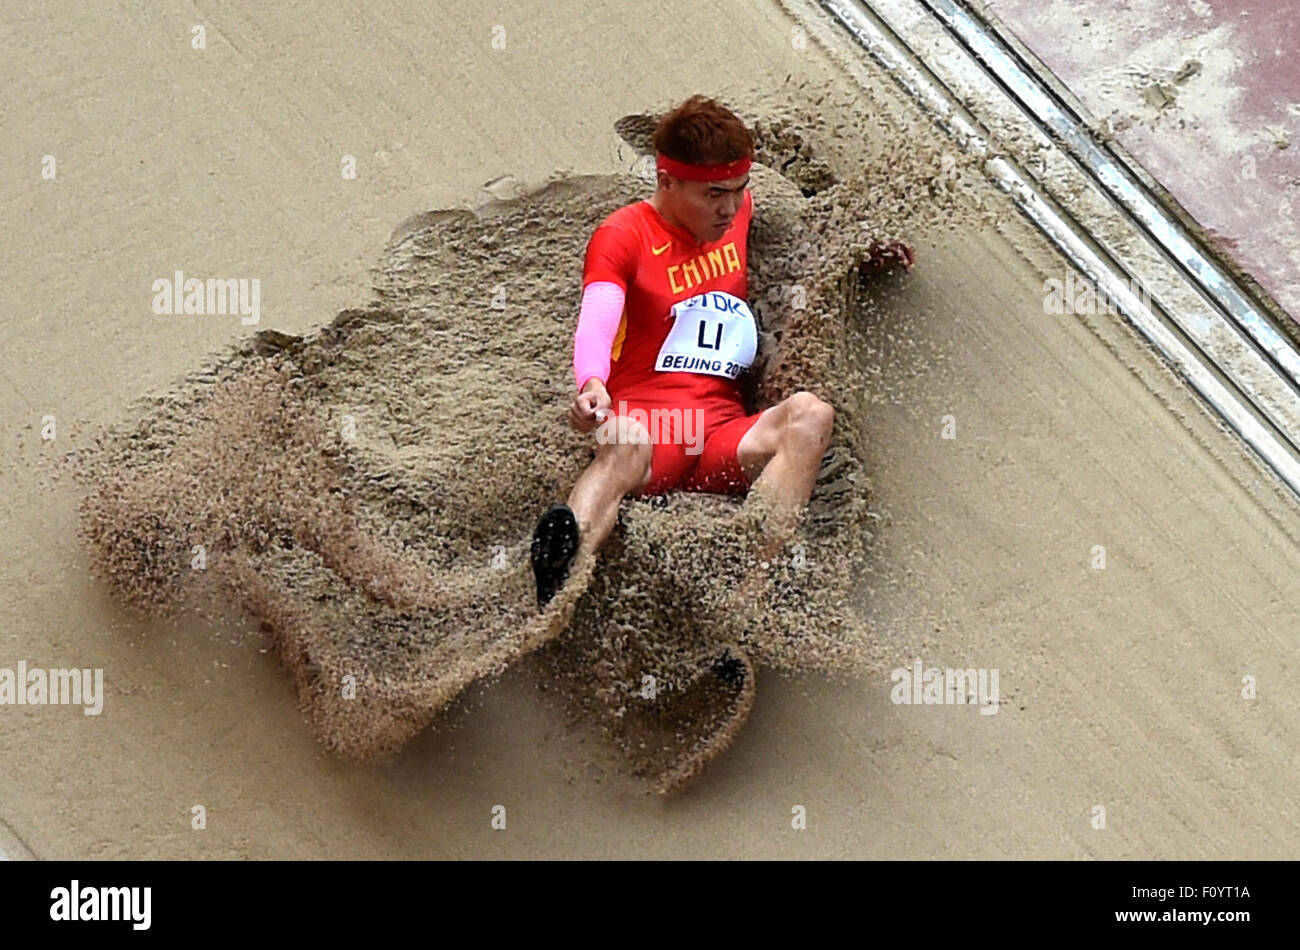 Beijing, China. 24th Aug, 2015. China's Li Jinzhe competes in the heats of the men's long jump at the 2015 IAAF World Championships at the 'Bird's Nest' National Stadium in Beijing, capital of China, Aug. 24, 2015. Credit:  Li Gang/Xinhua/Alamy Live News Stock Photo